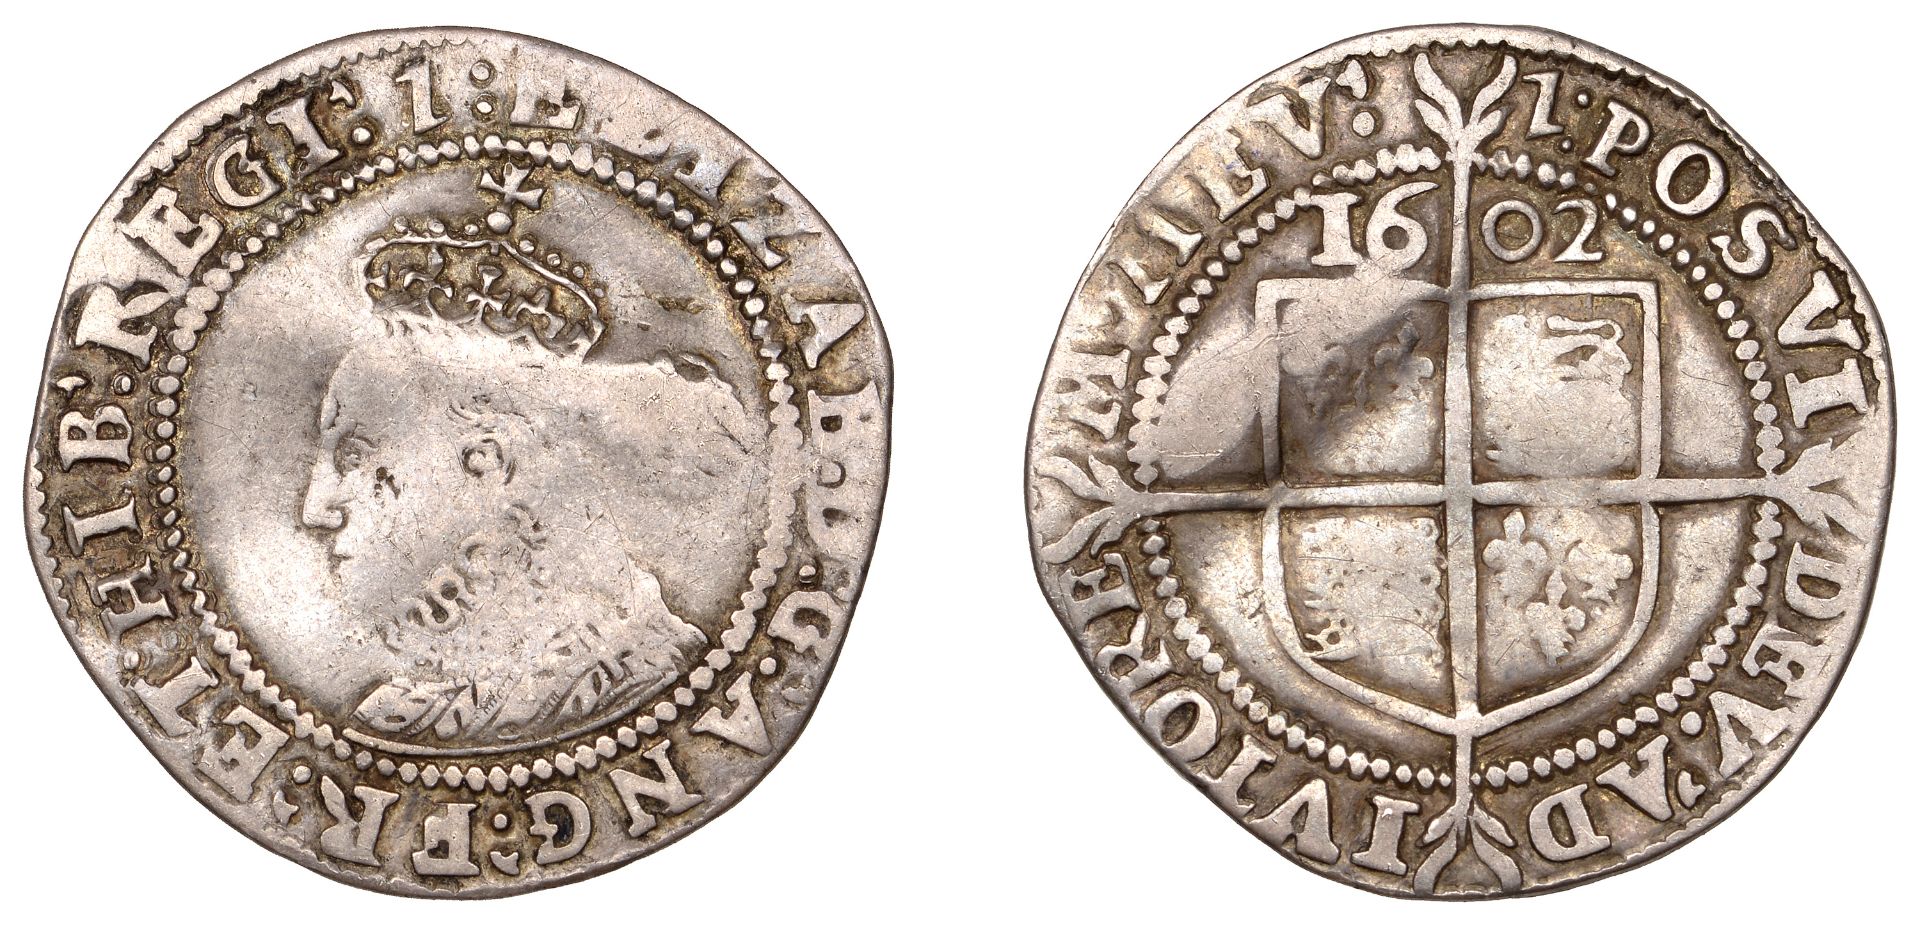 Elizabeth I (1558-1603), Seventh issue, Sixpence, 1602, mm. 1, bust 6C, 2.82g/1h (N 2015; S...